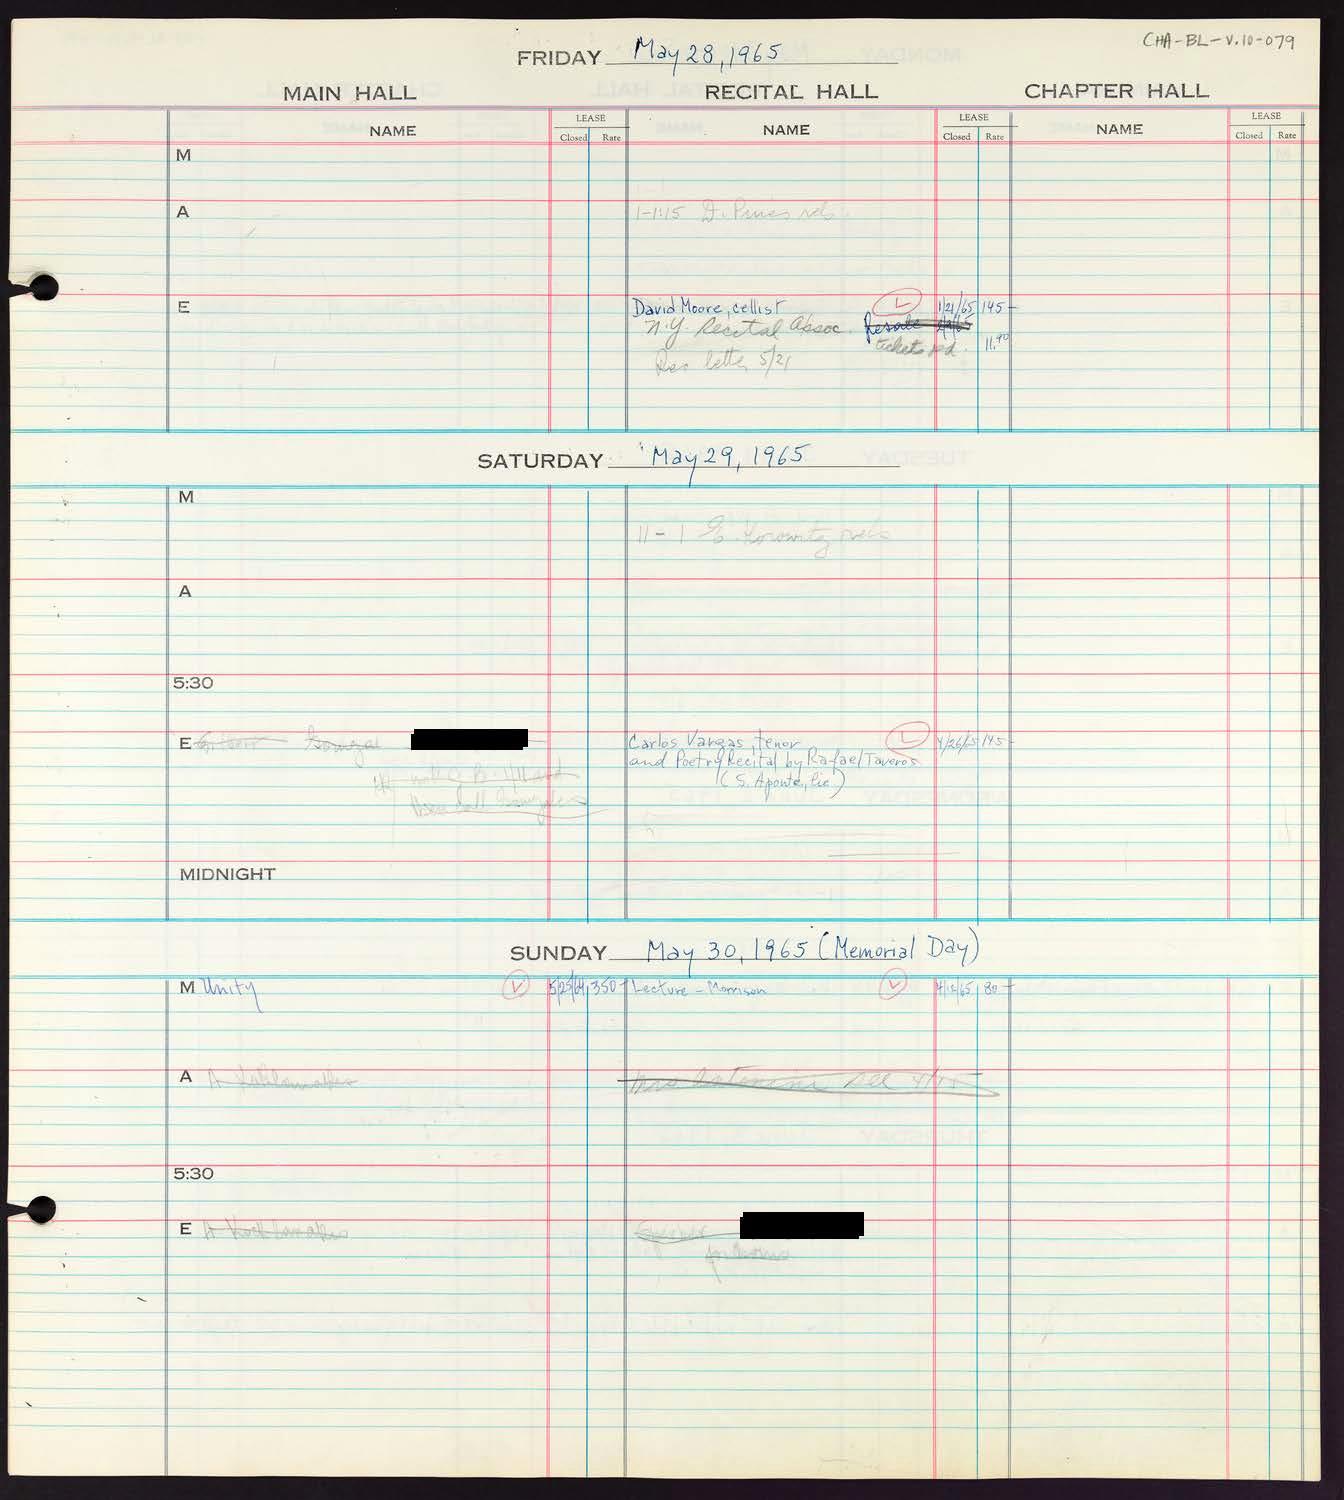 Carnegie Hall Booking Ledger, volume 10, page 79